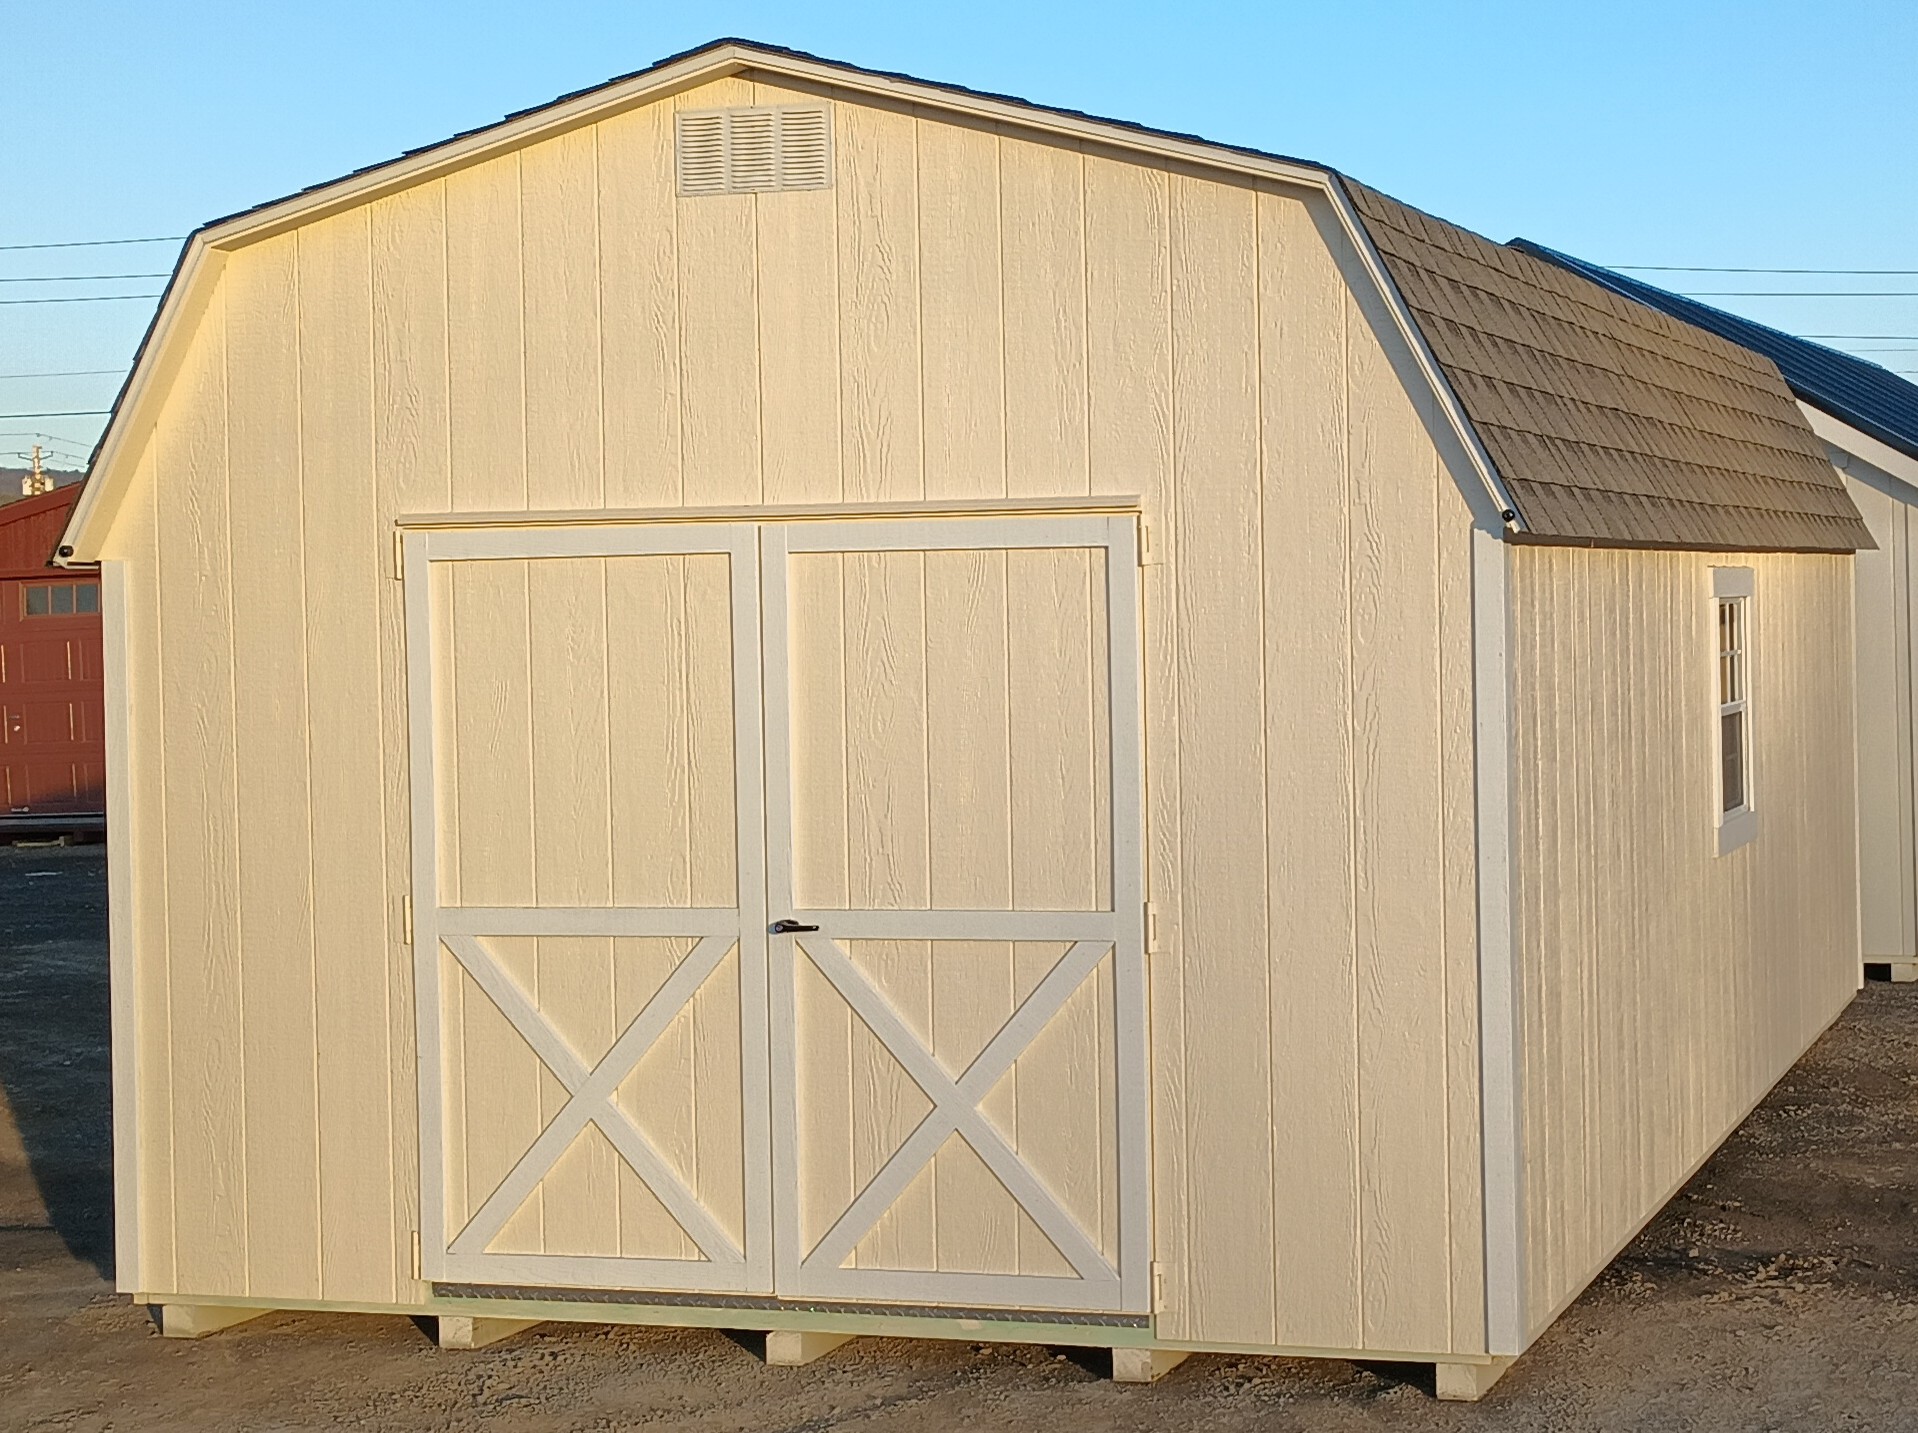 Wall barn with off white color and white trim with double doors and 2 windows